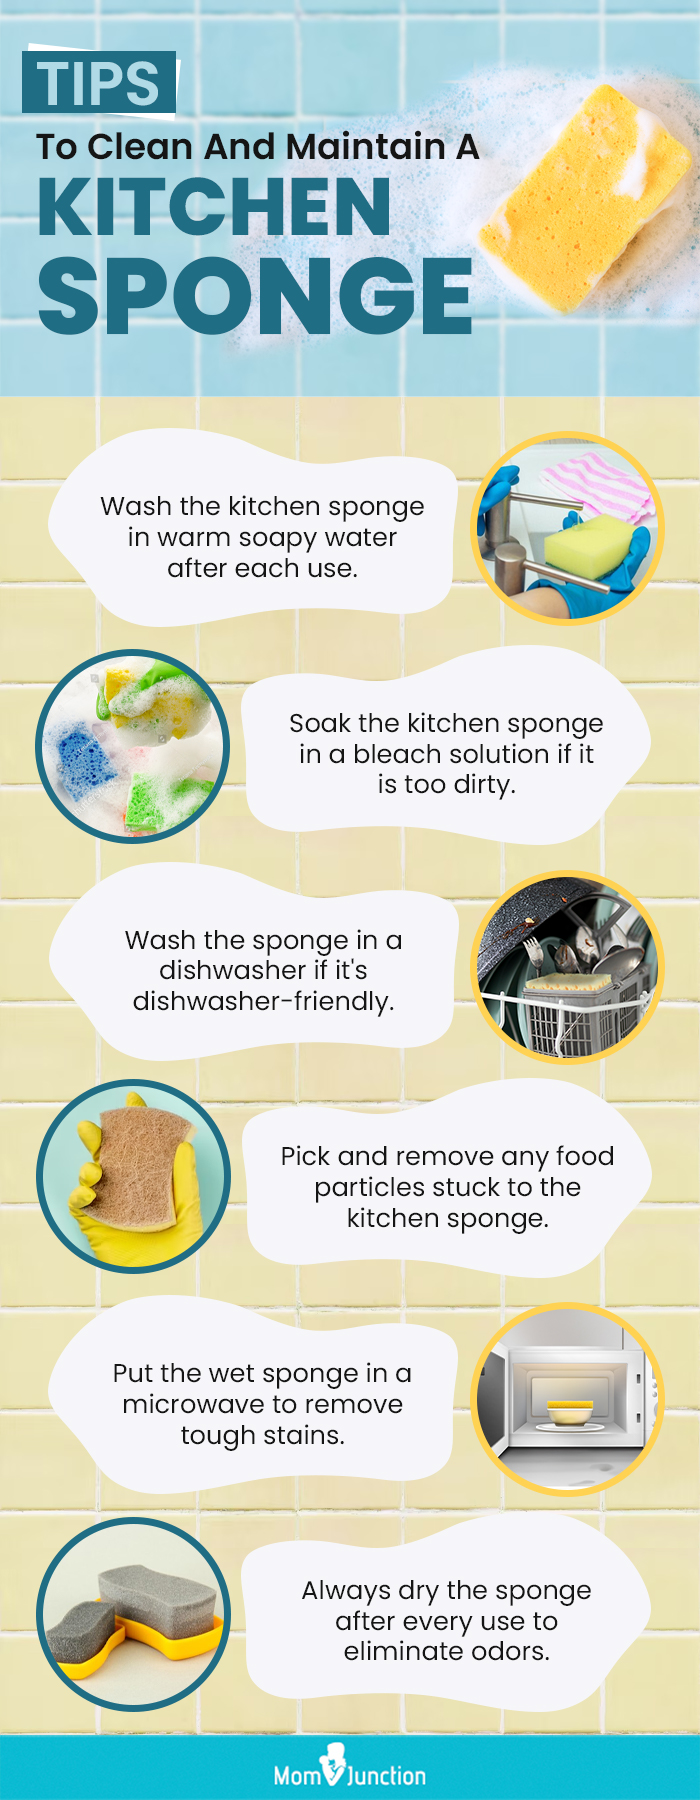 https://cdn2.momjunction.com/wp-content/uploads/2023/06/Tips-To-Clean-And-Maintain-A-Kitchen-Sponge.jpg